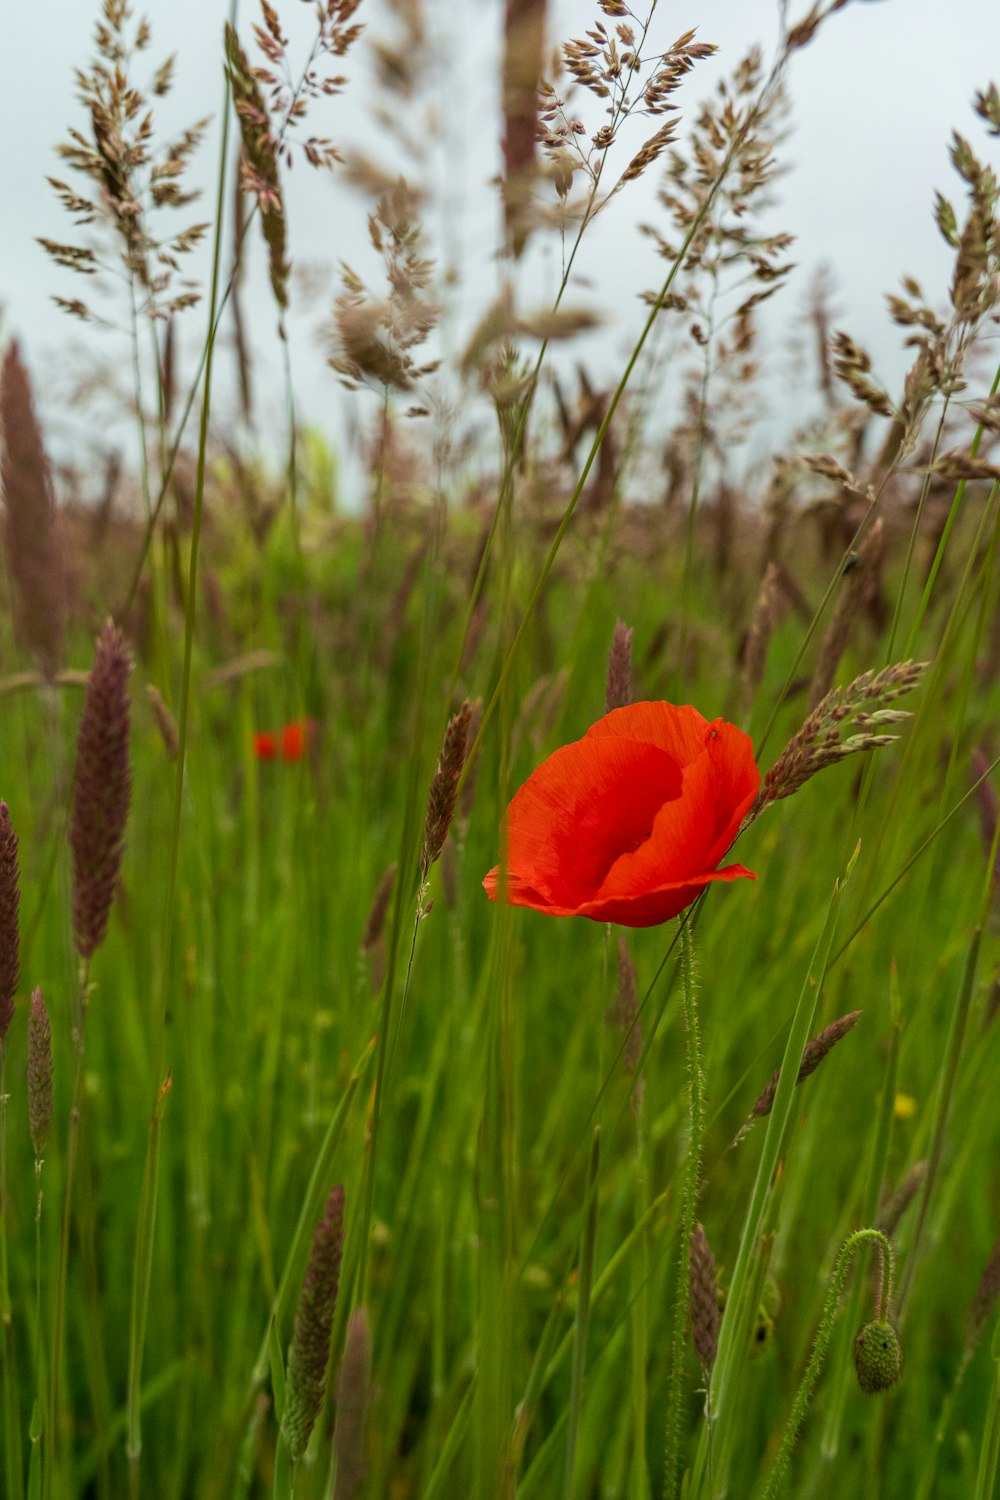 a red poppy in a field of tall grass